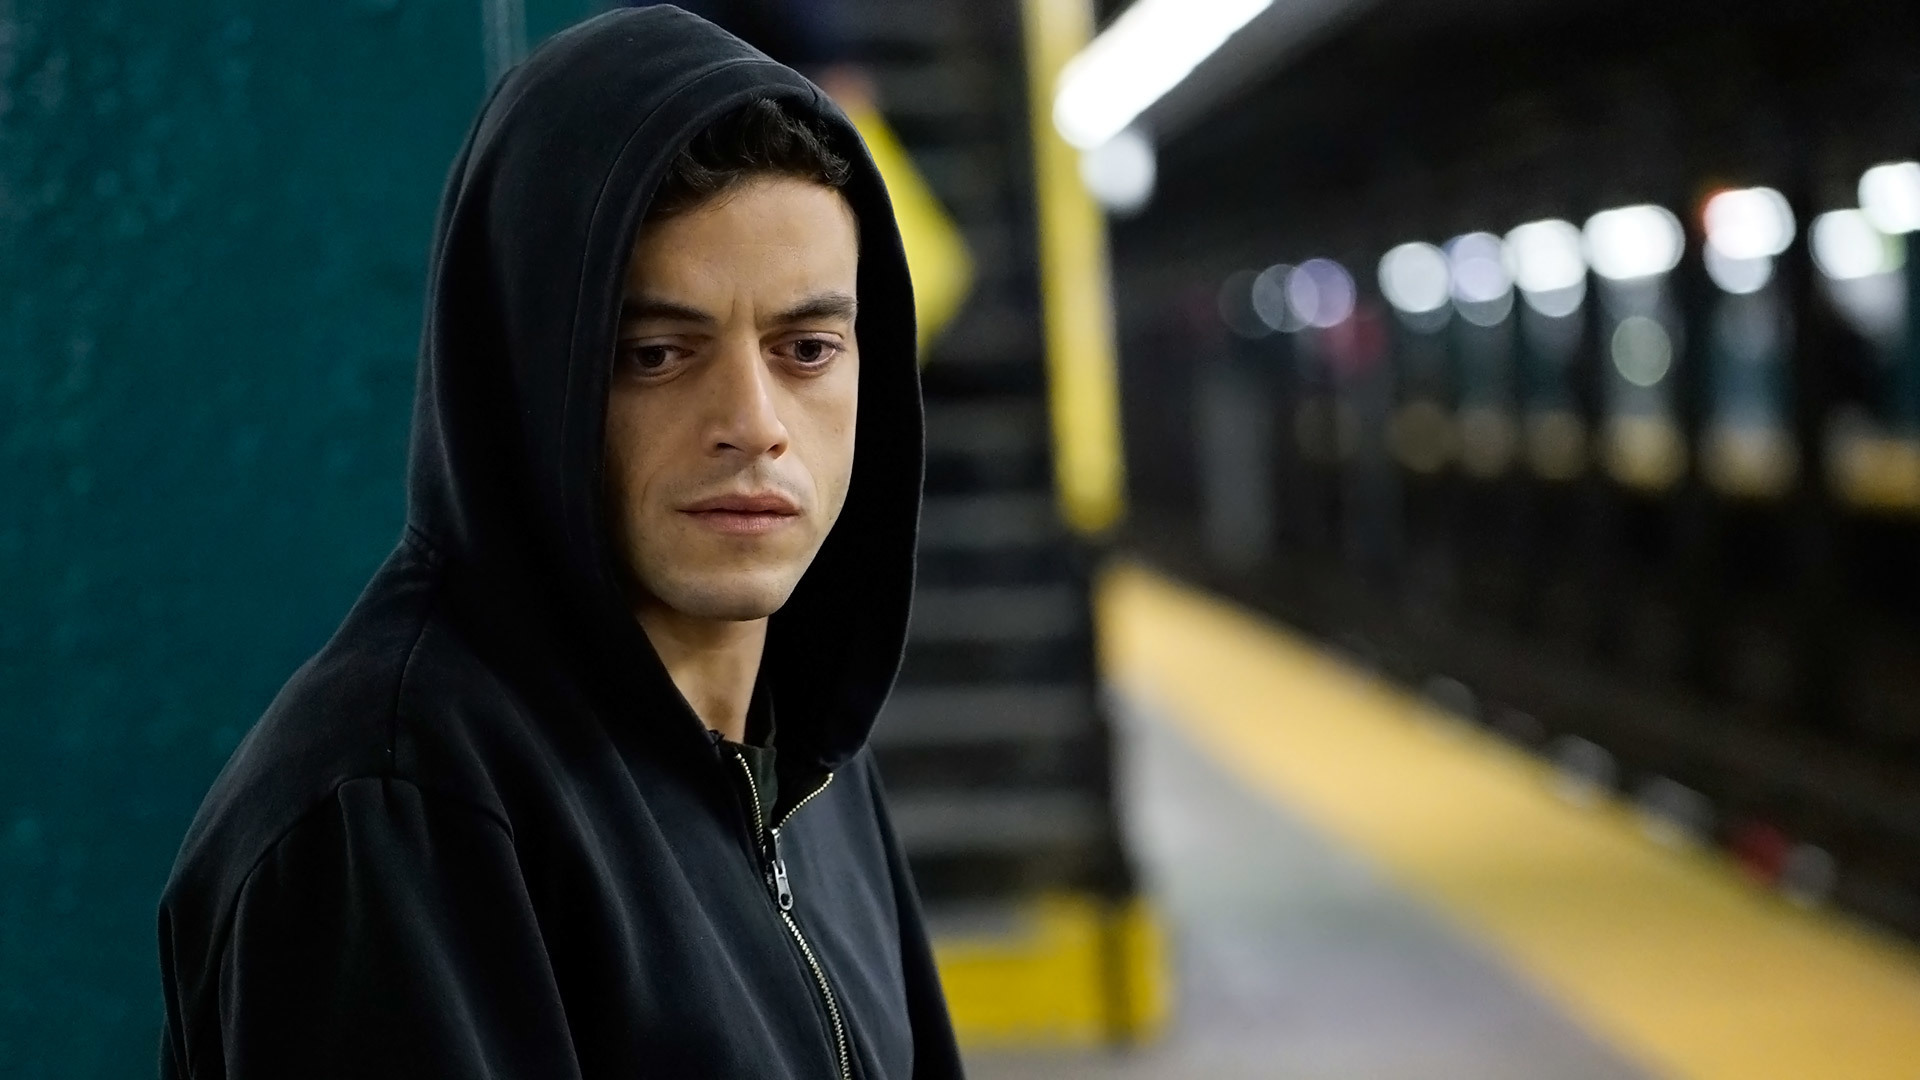 Mr Robot Tags See Tv Show Online